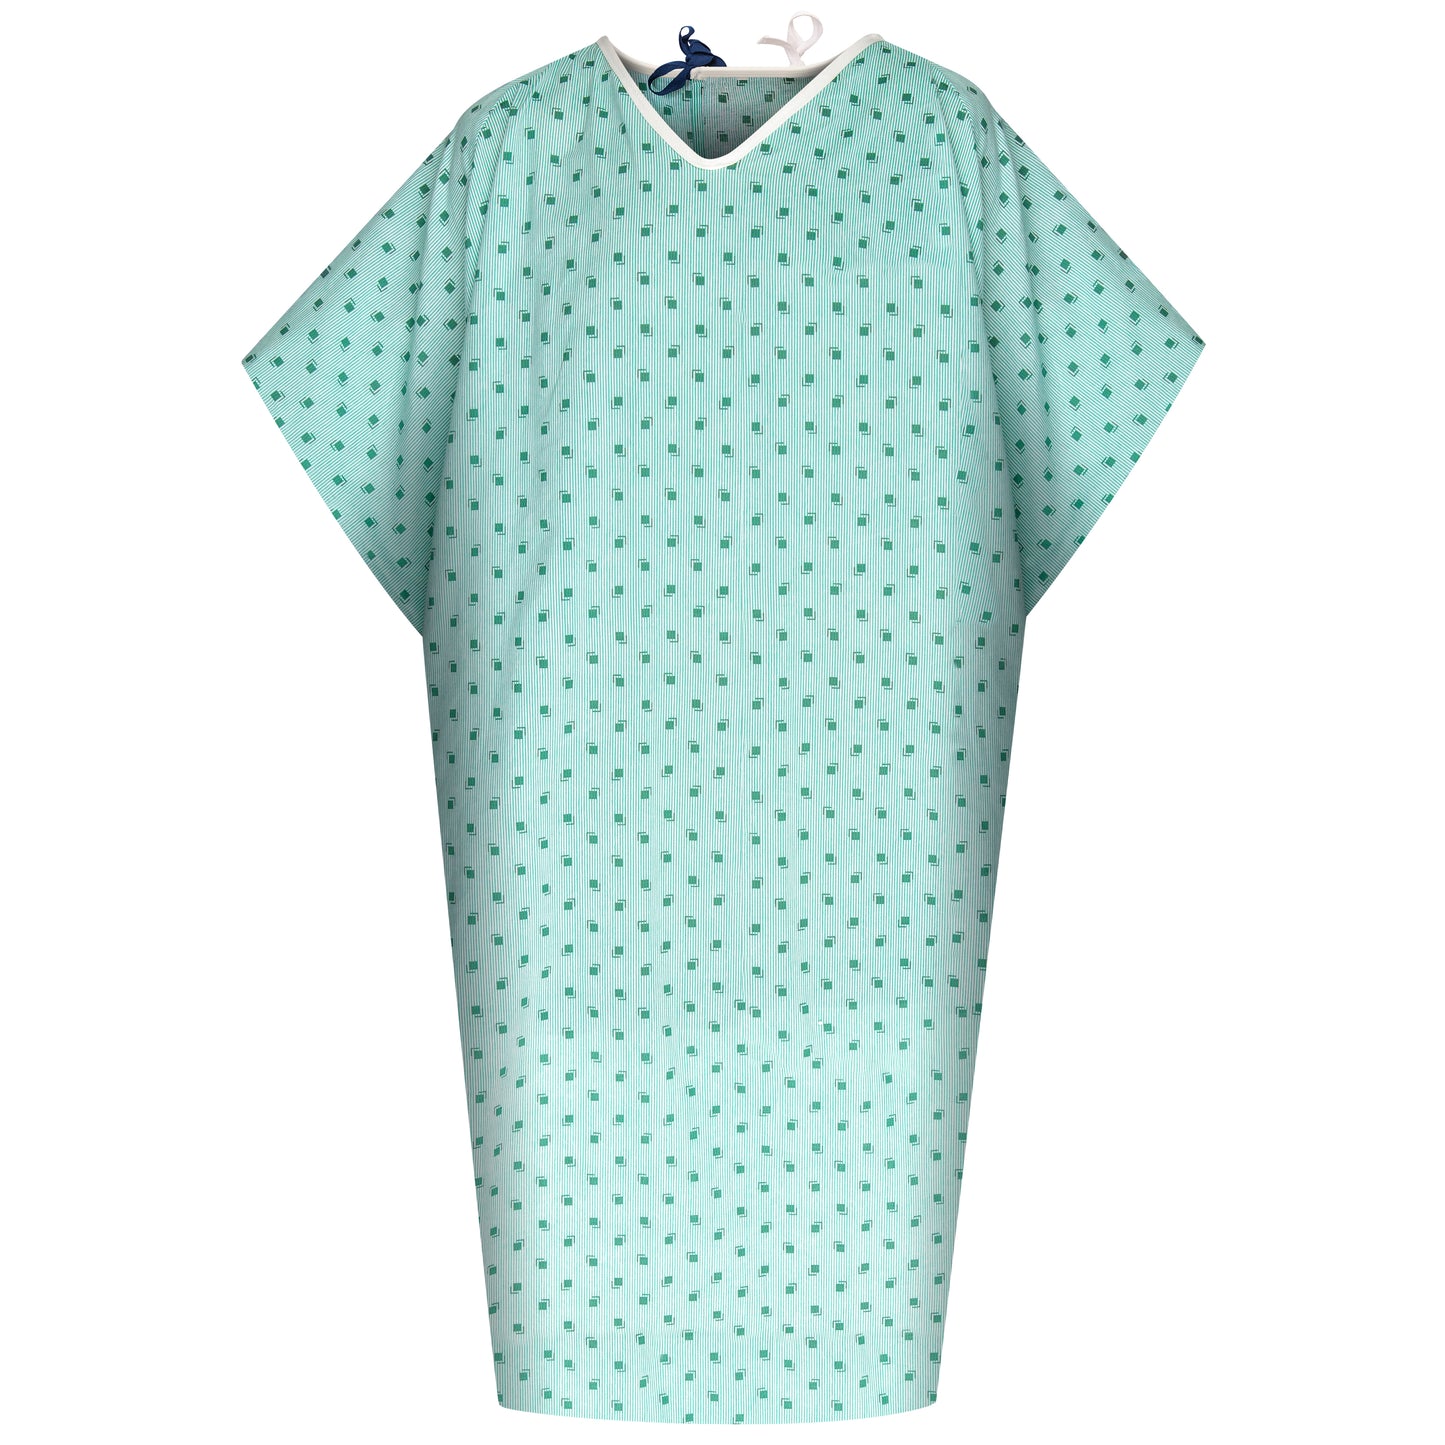 Patient Gown 51 x 104 Angle Back, 2 Tie Overlap (10X-Large) Ventura Print, Green